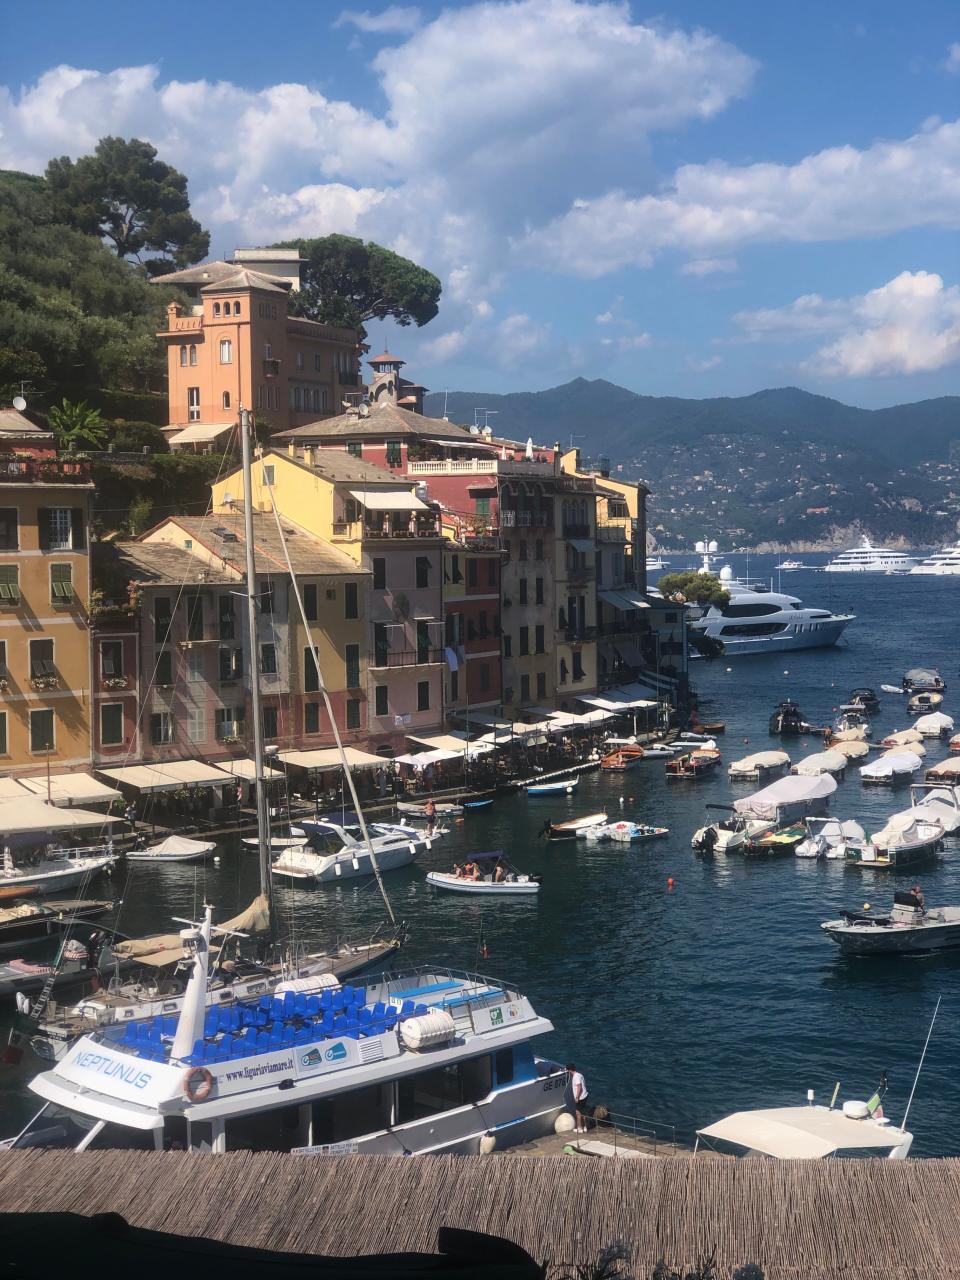 Portofino, Italy, Laura Kiniry, "I went on a tall sailing ship in the French Riviera for a week and felt transported to a bygone era."